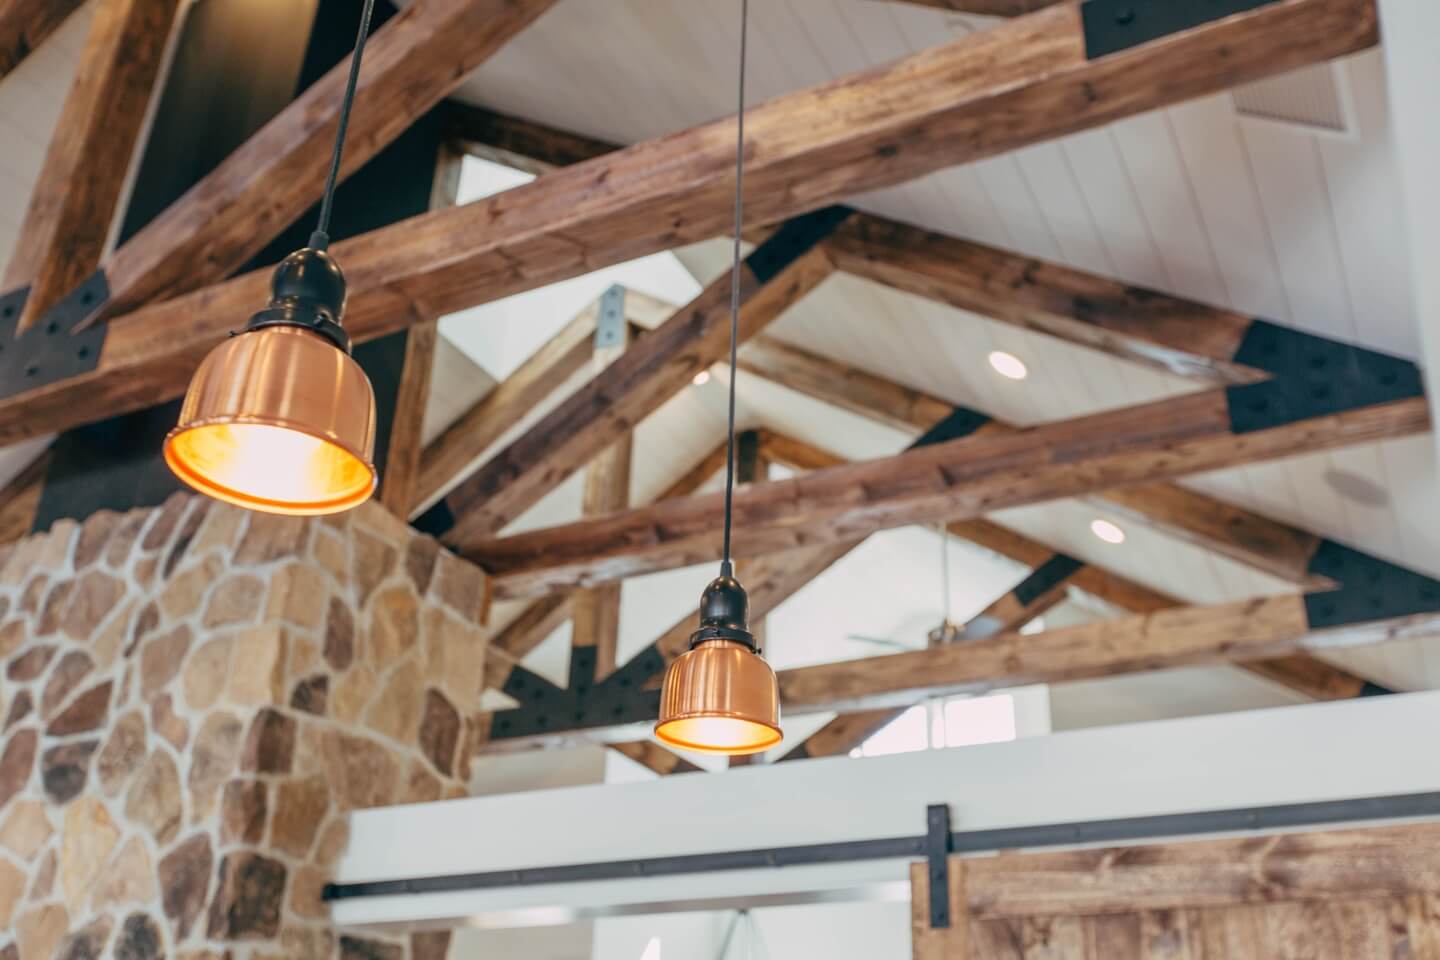 Lamps hanging from a dark brown wooden ceiling